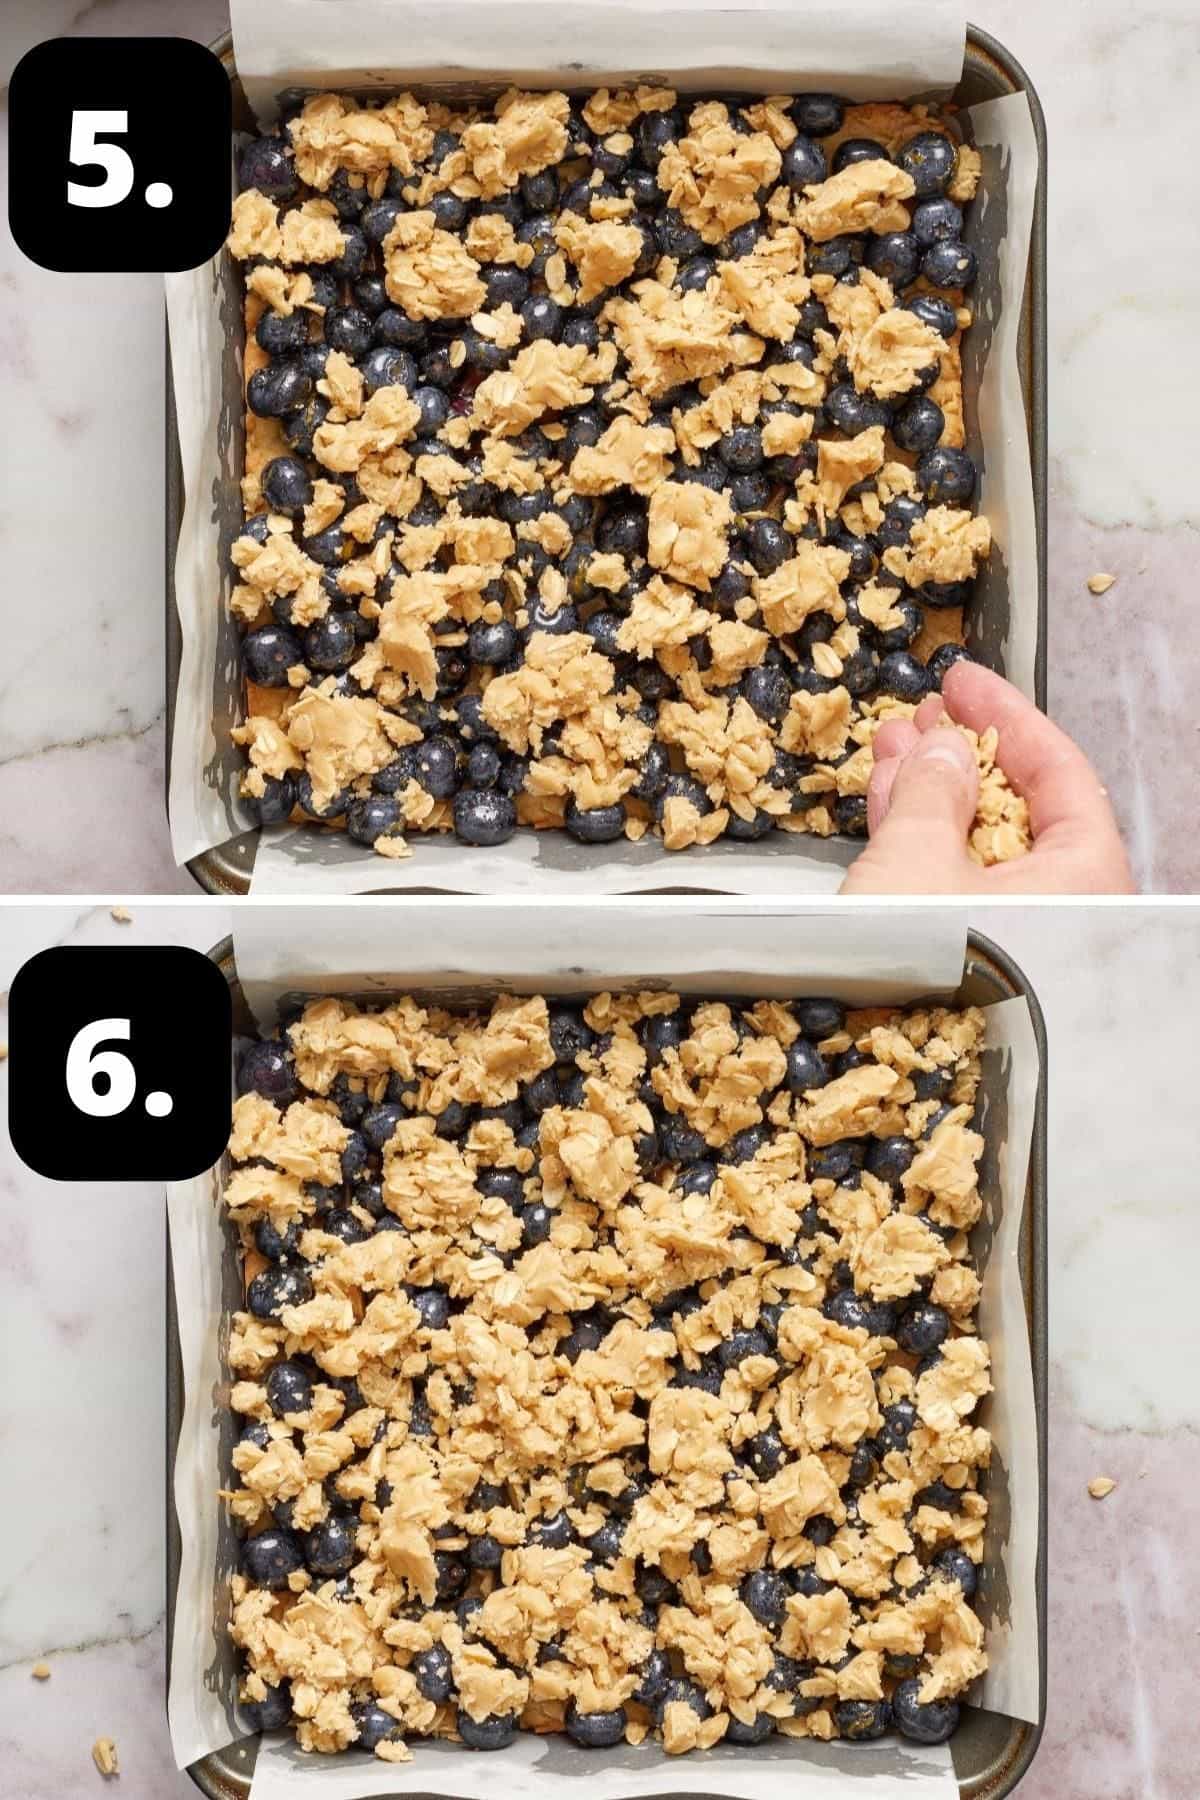 Steps 5-6 of preparing this recipe: crumbling the topping over the blueberries and base and the bars ready for the oven.